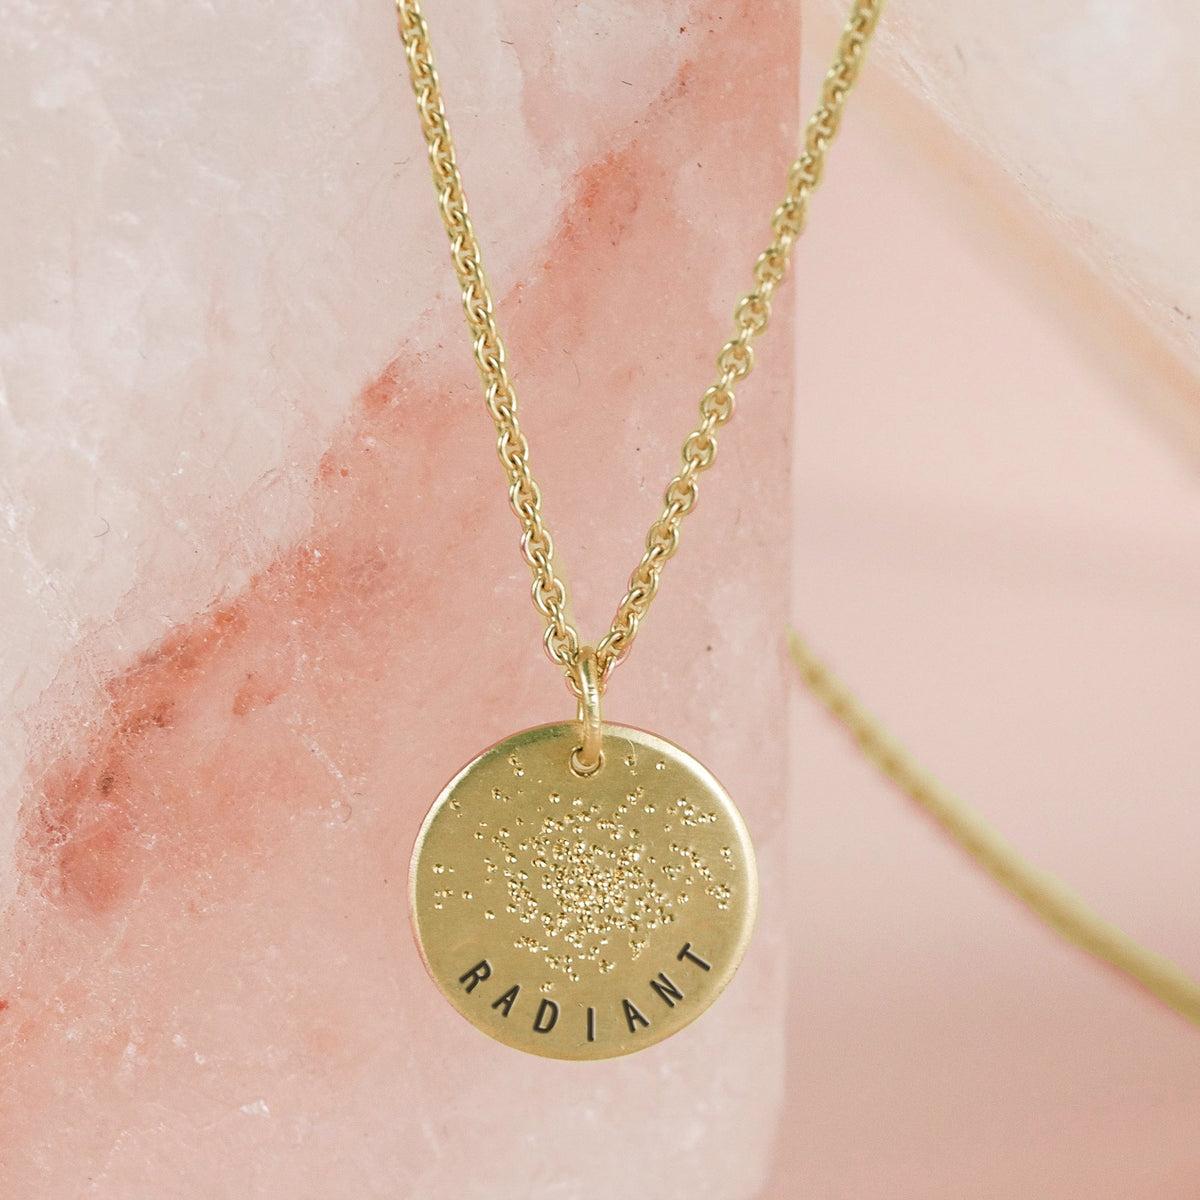 gold mini coin necklace